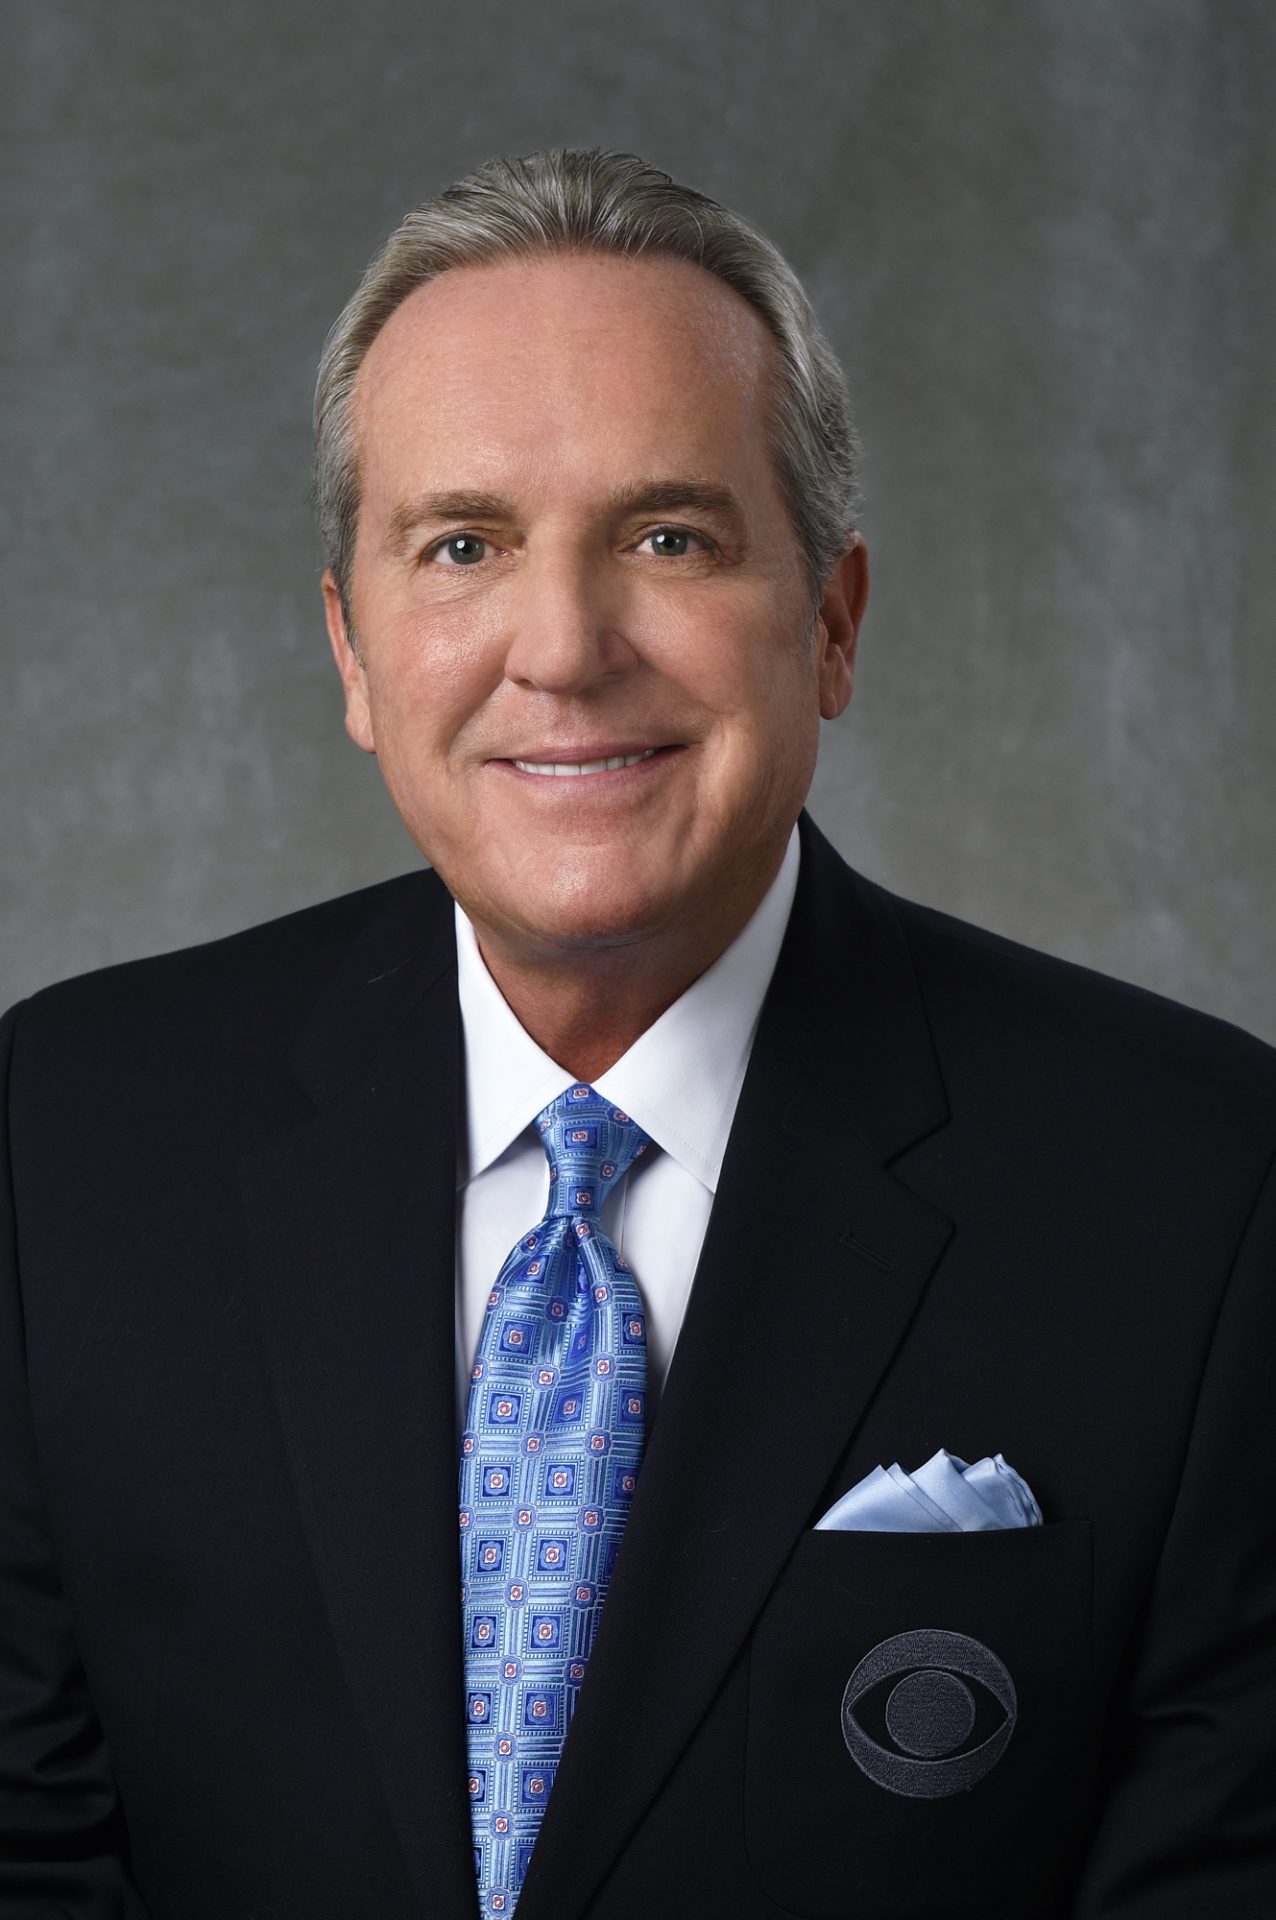 (LISTEN): Longtime CBS Sports broadcaster Brad Nessler previews Mizzou-Tennessee; expresses sadness about SEC change